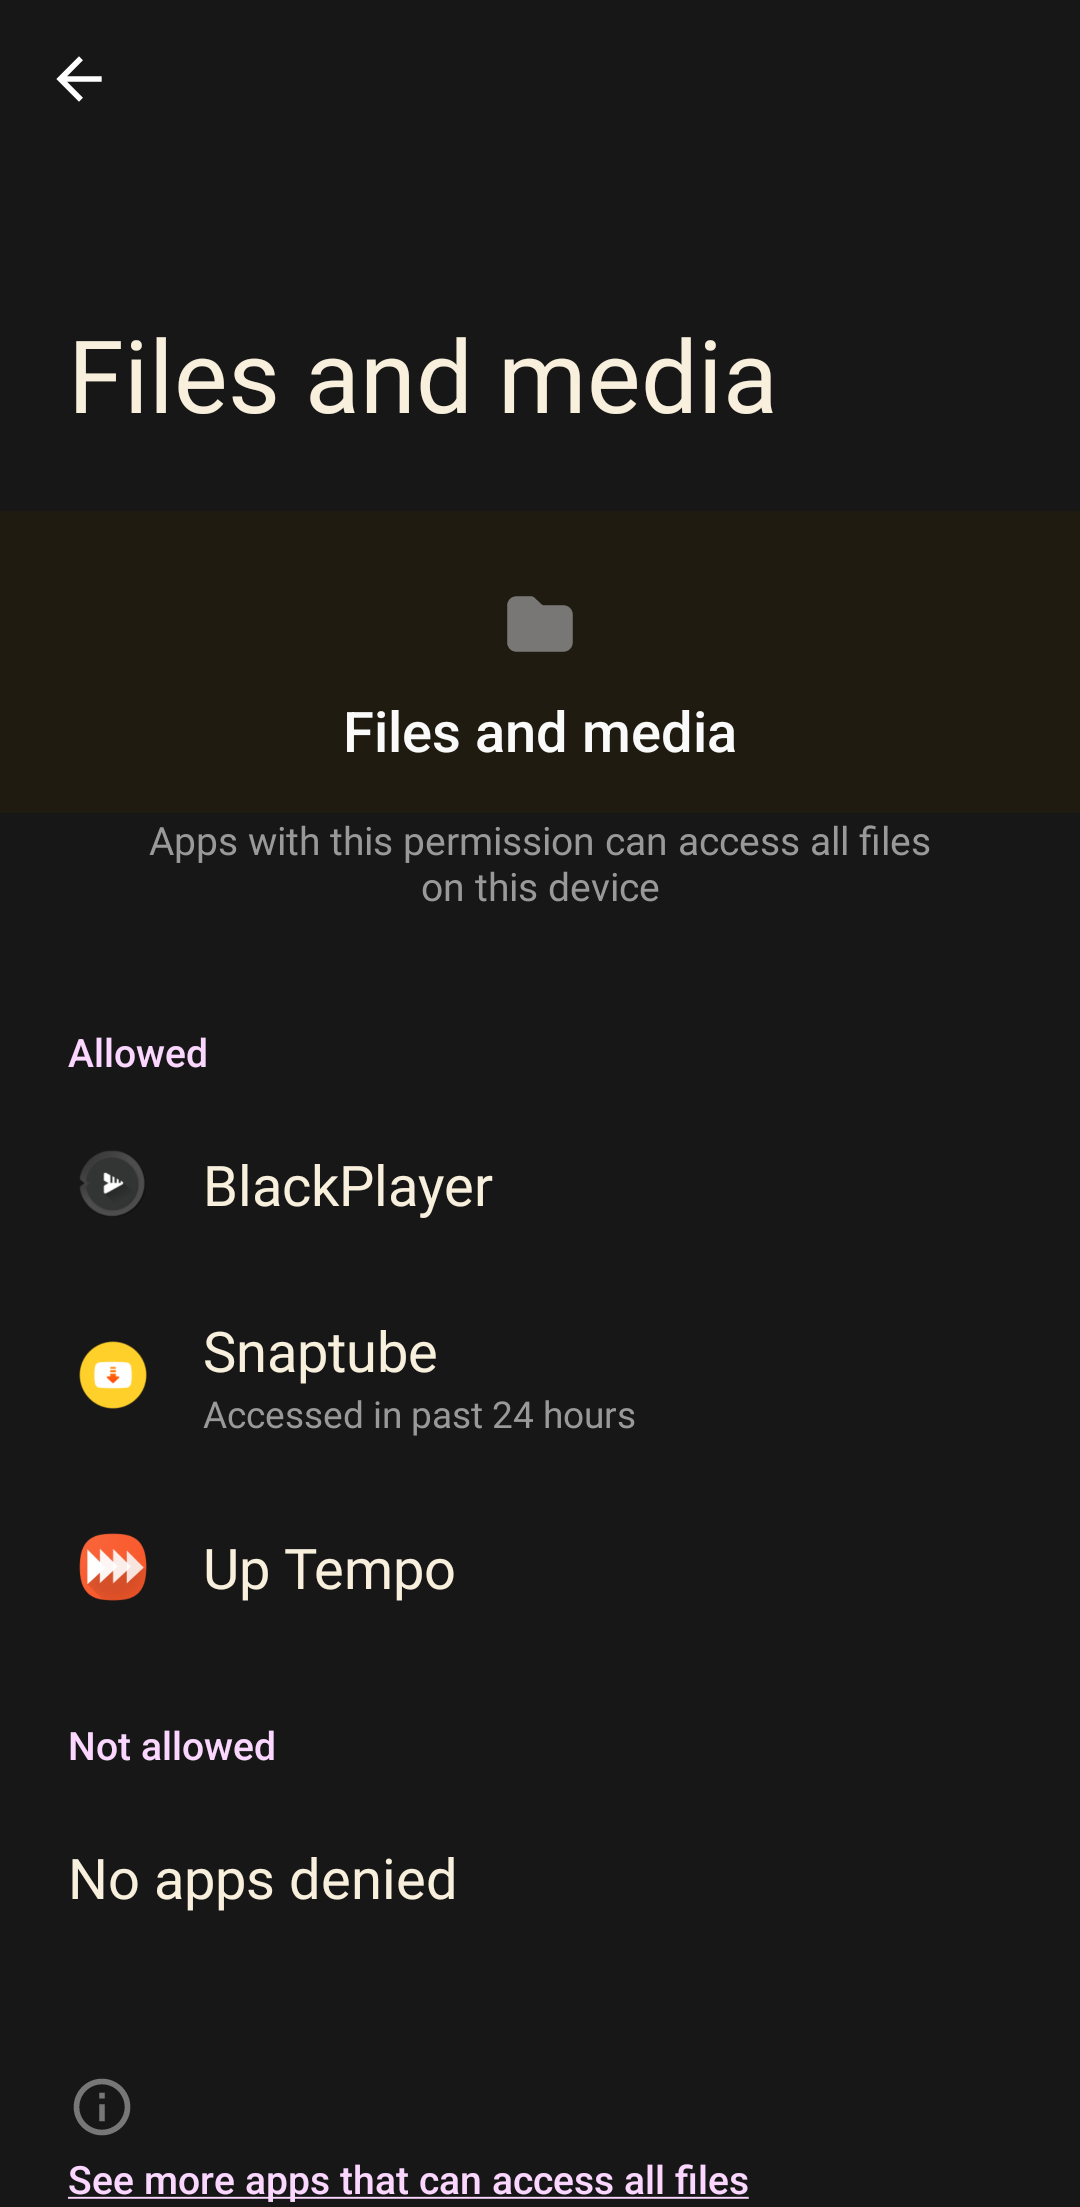 Files and media permissions settings on Android